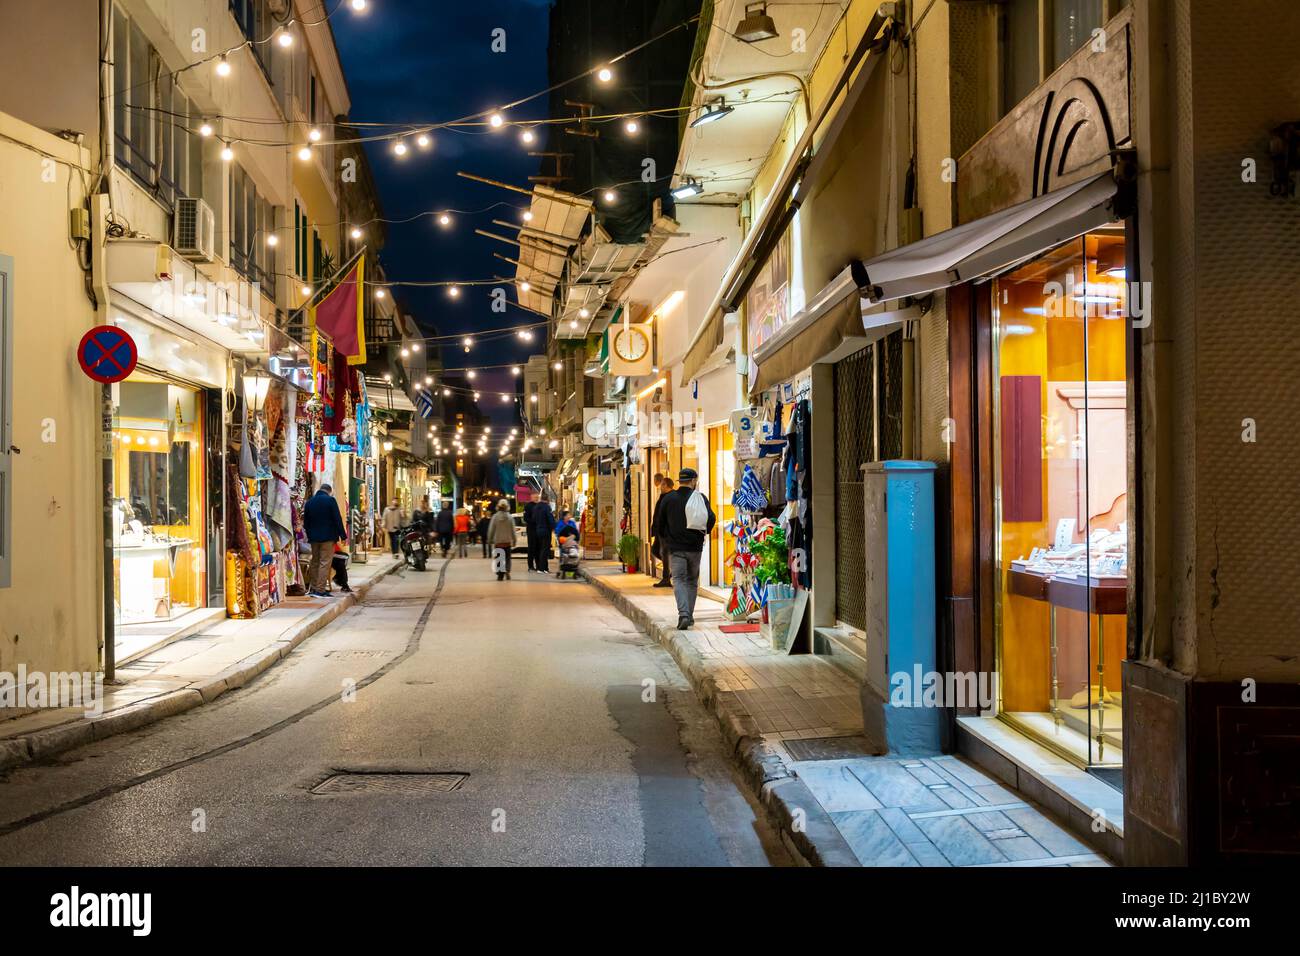 A colorfully illuminated narrow street of shops and cafes in the busy and touristic Plaka district of Athens, Greece at night. Stock Photo